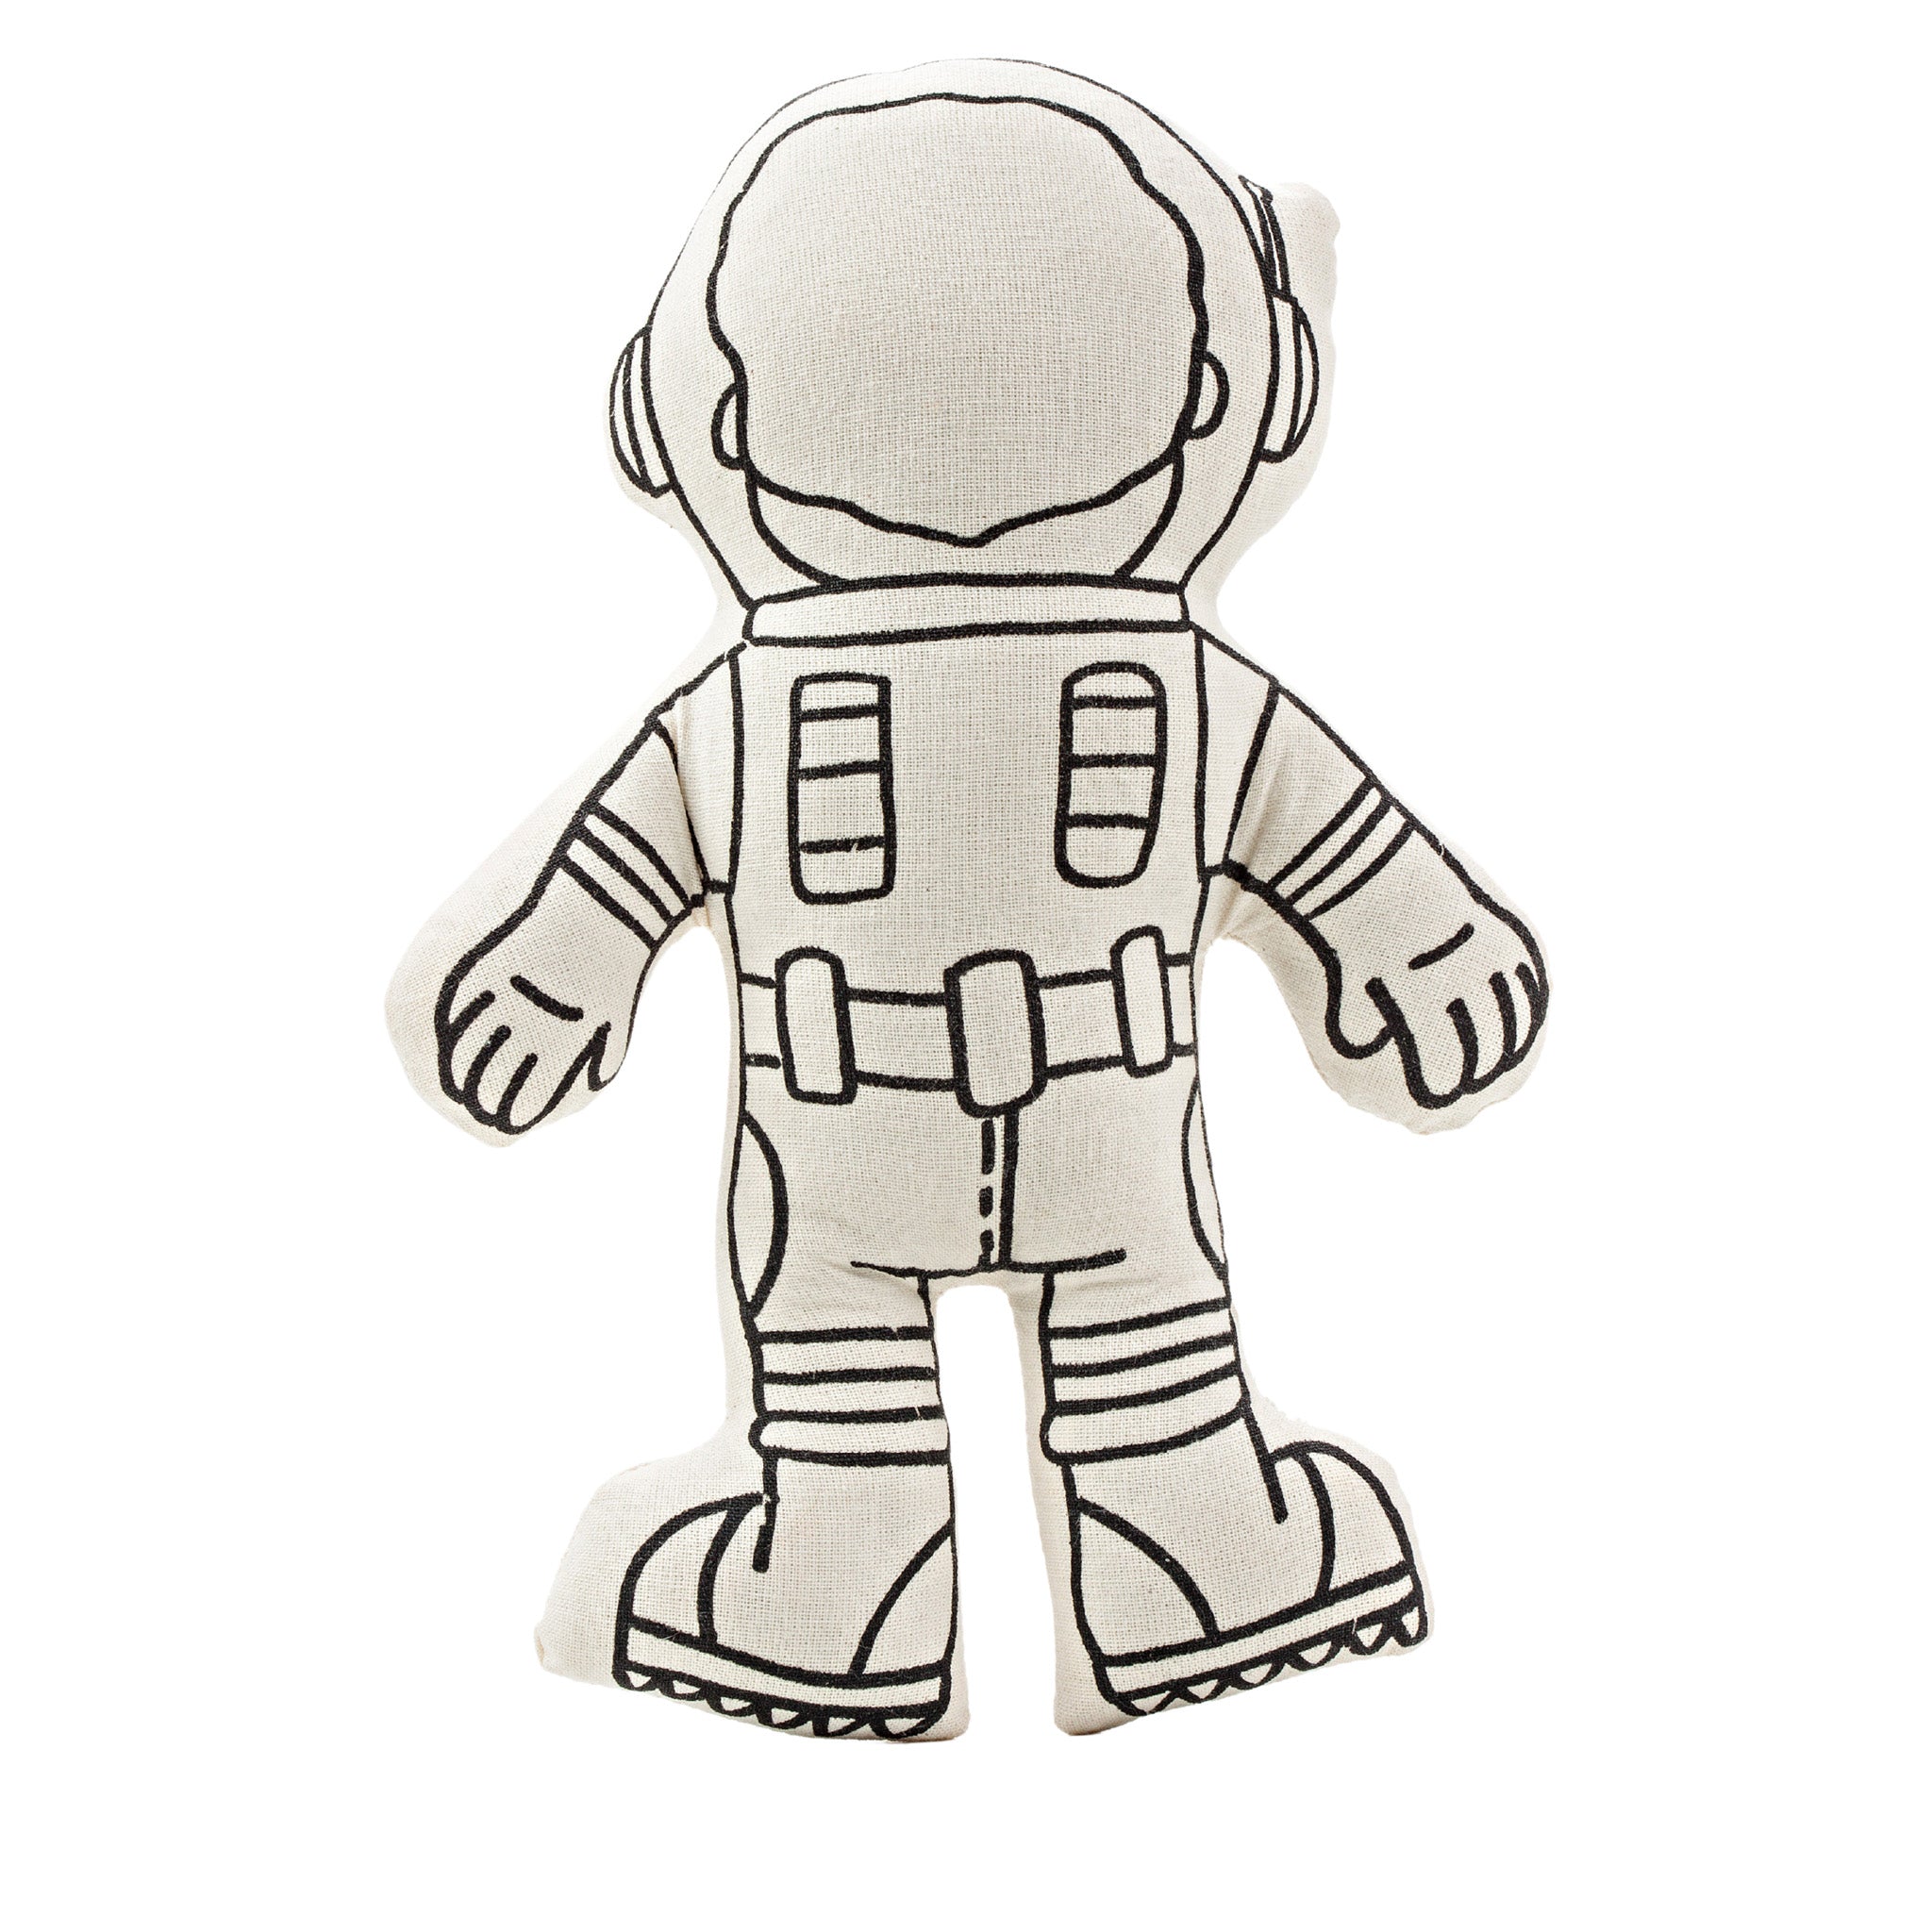 How to Draw an Astronaut Step by Step | Astronaut drawing, Drawing lessons  for kids, Drawing tutorials for kids